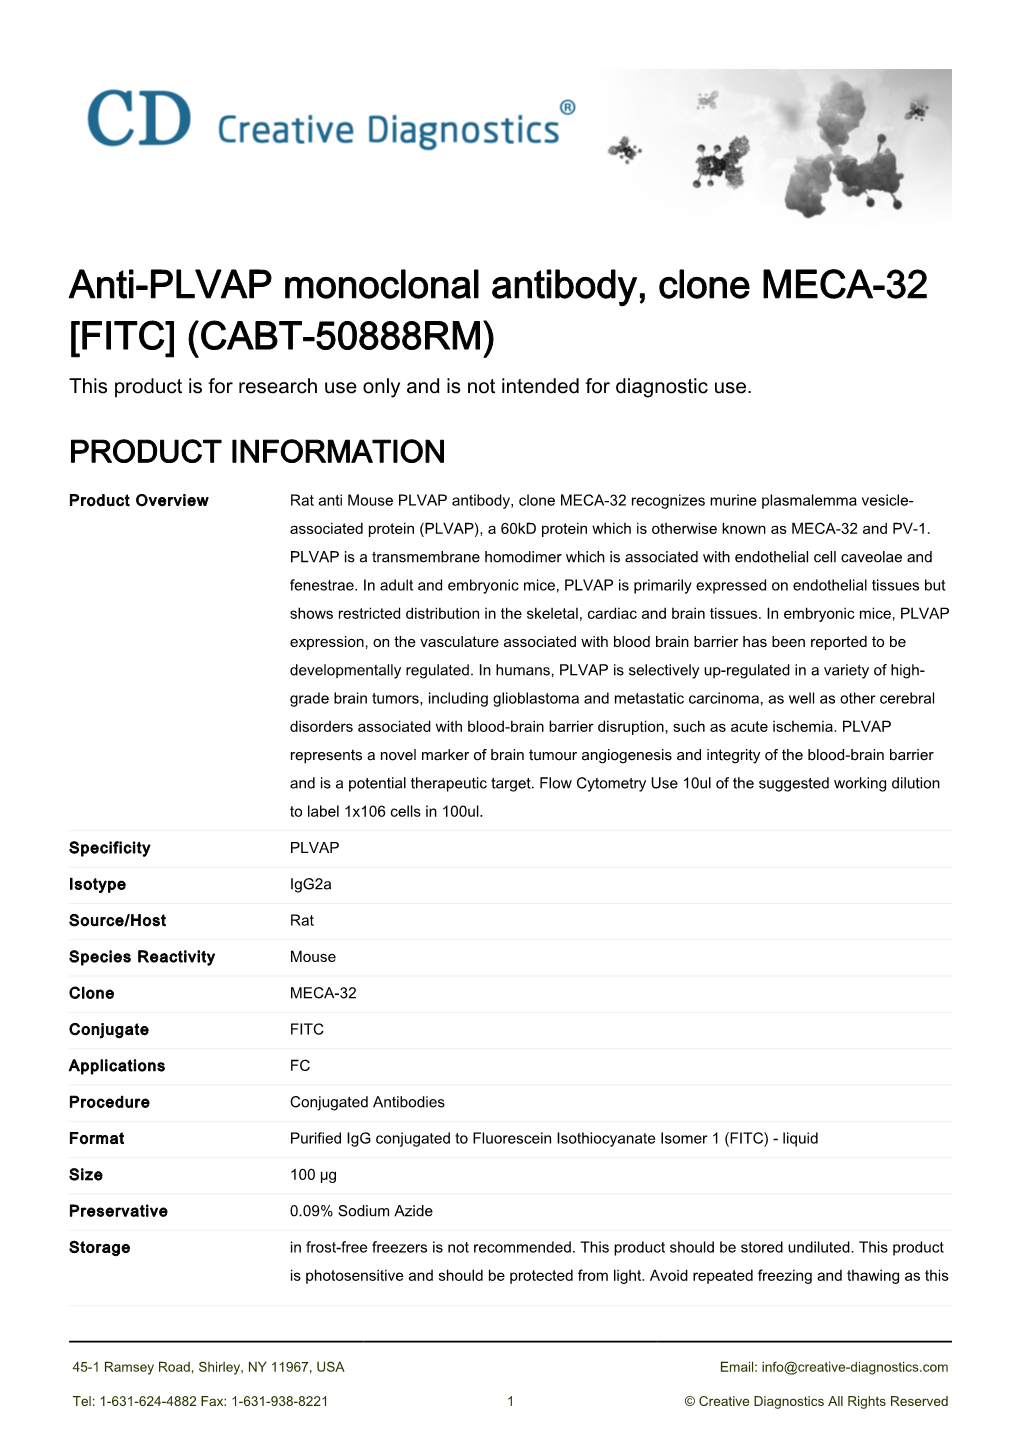 Anti-PLVAP Monoclonal Antibody, Clone MECA-32 [FITC] (CABT-50888RM) This Product Is for Research Use Only and Is Not Intended for Diagnostic Use